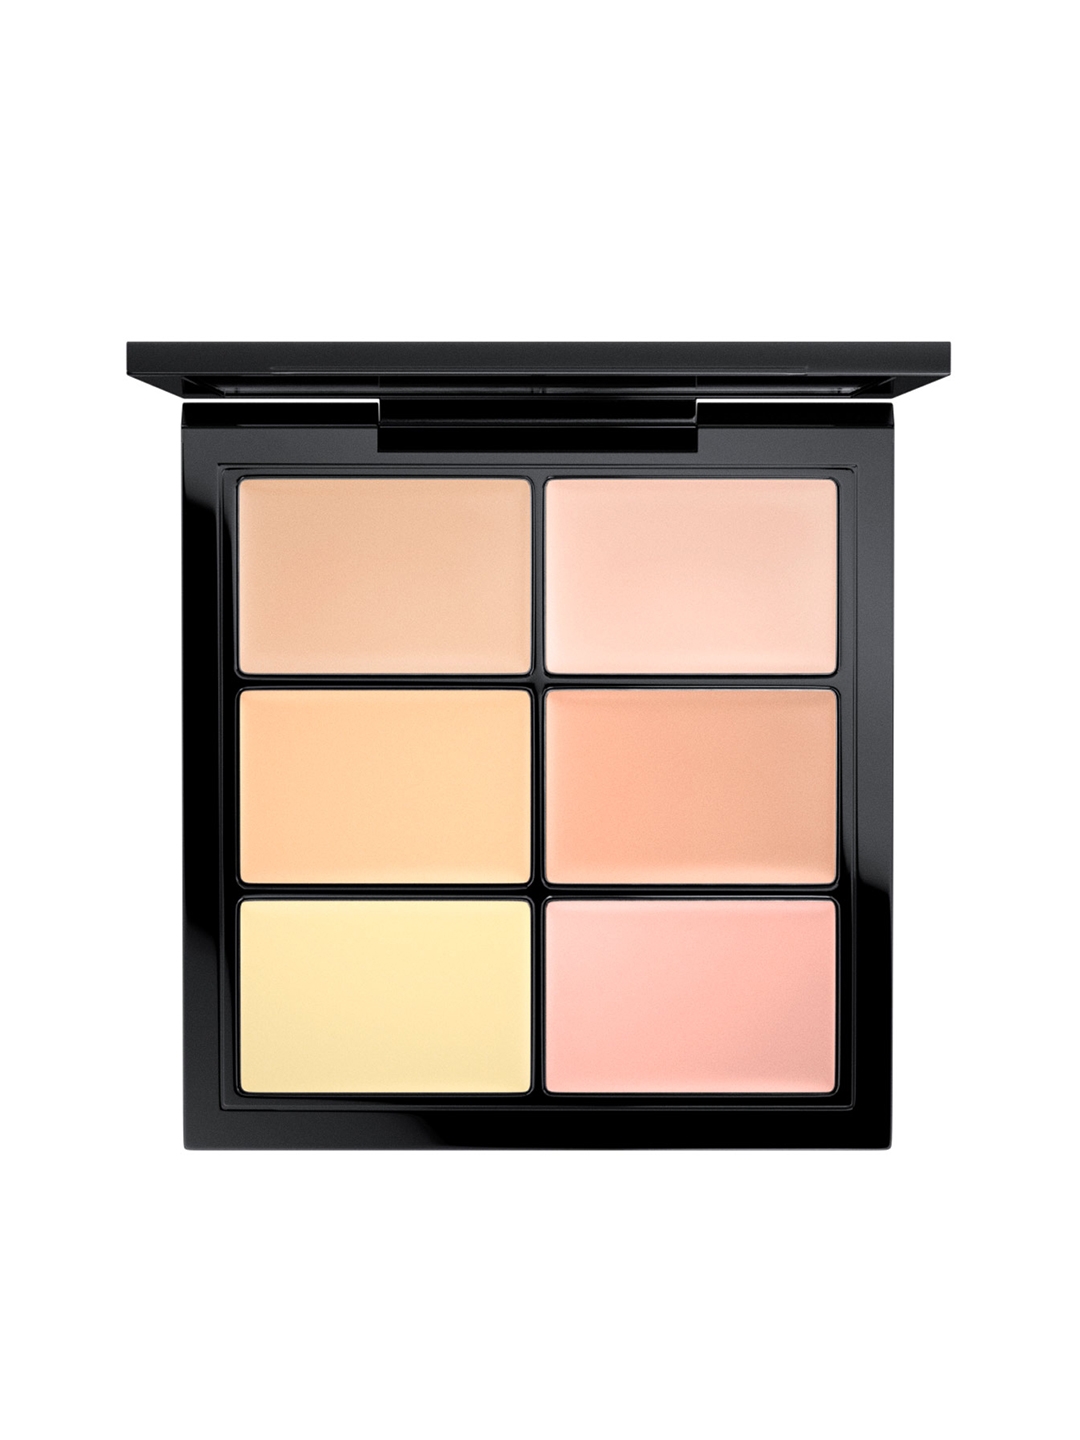 M.A.C Light Pro Conceal And Correct Palette